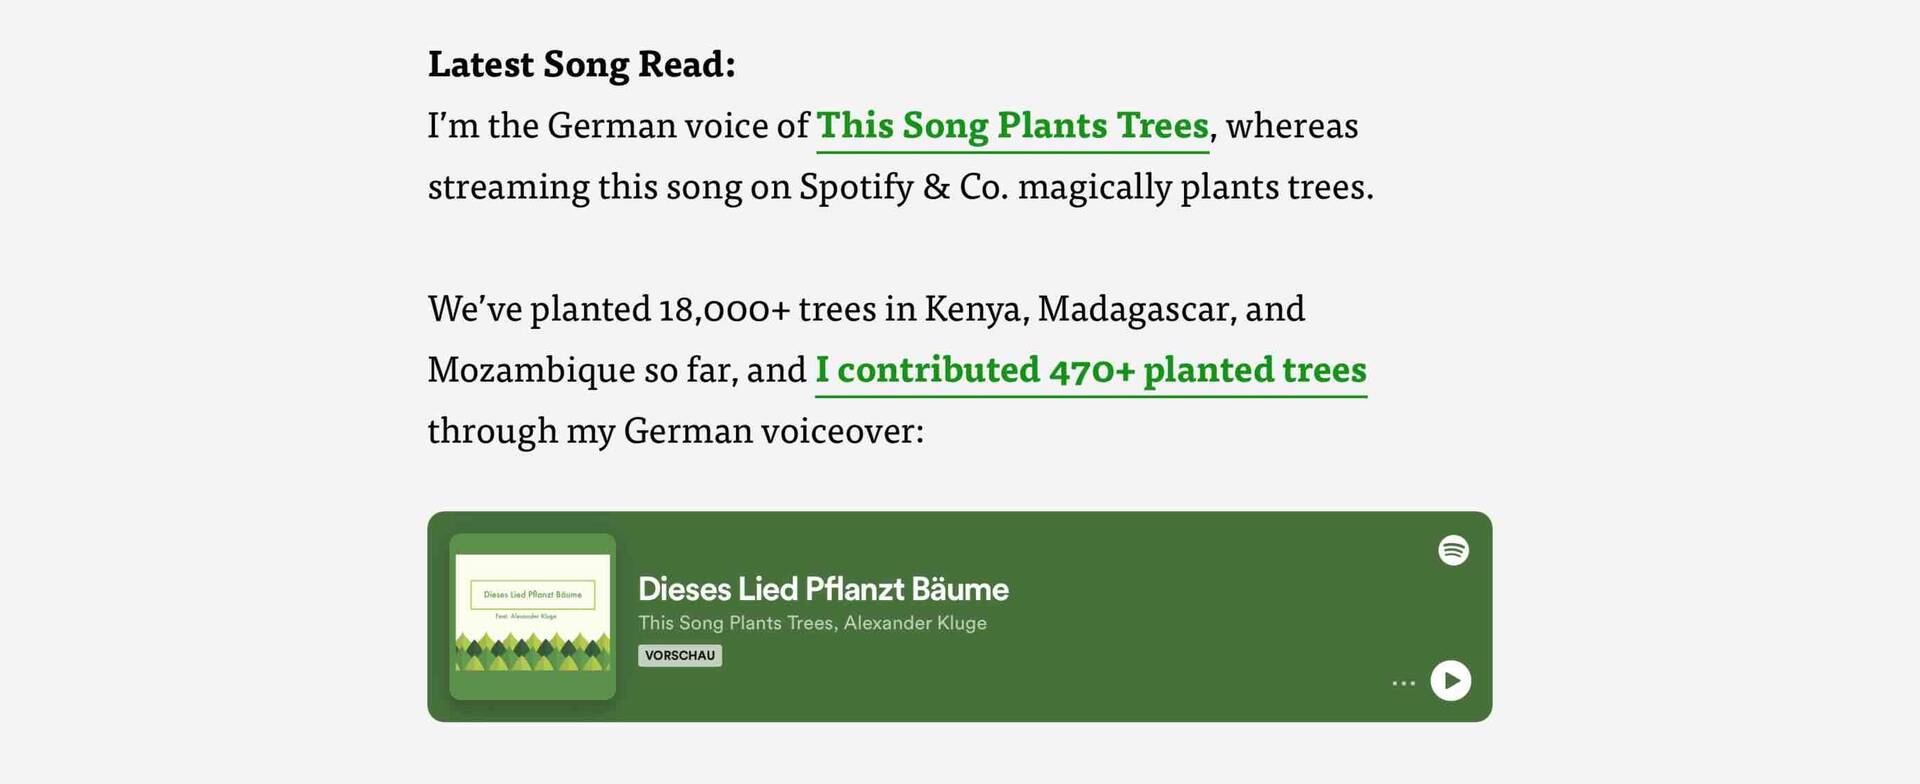 New “Lastest Song Read” section - I’m the German voice of This Song Plants Trees -  na.jpg